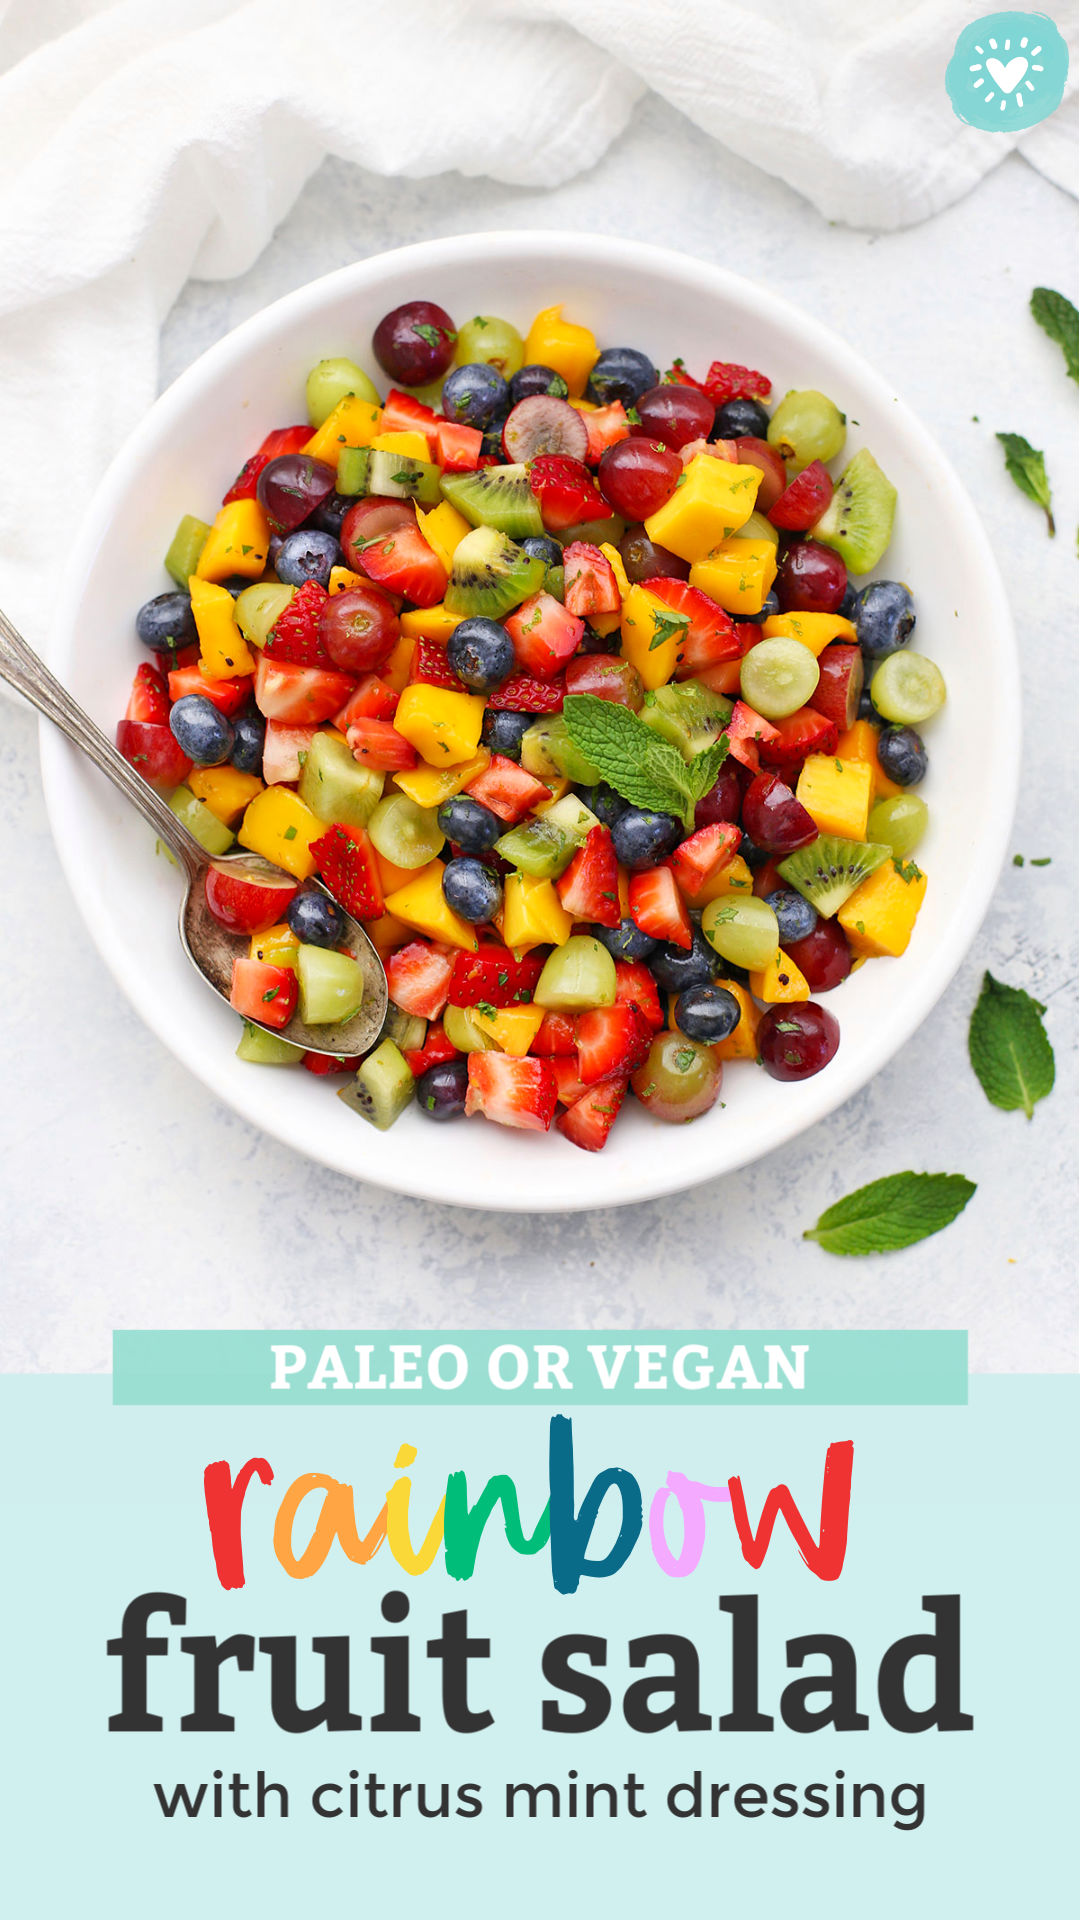 The Best Rainbow Fruit Salad with Citrus Mint Dressing - This rainbow fruit salad is always a favorite with kids and grown-ups. Perfect for picnics, potlucks, brunches, barbecues, and more! (Gluten free, paleo & vegan friendly) // rainbow fruit salad // honey mint dressing // citrus mint dressing recipe // fruit salad with dressing // the best fruit salad recipe #fruitsalad #rainbow #rainbowfood #rainbowparty #rainbowfruitsalad #citrus #mint #brunchrecipes